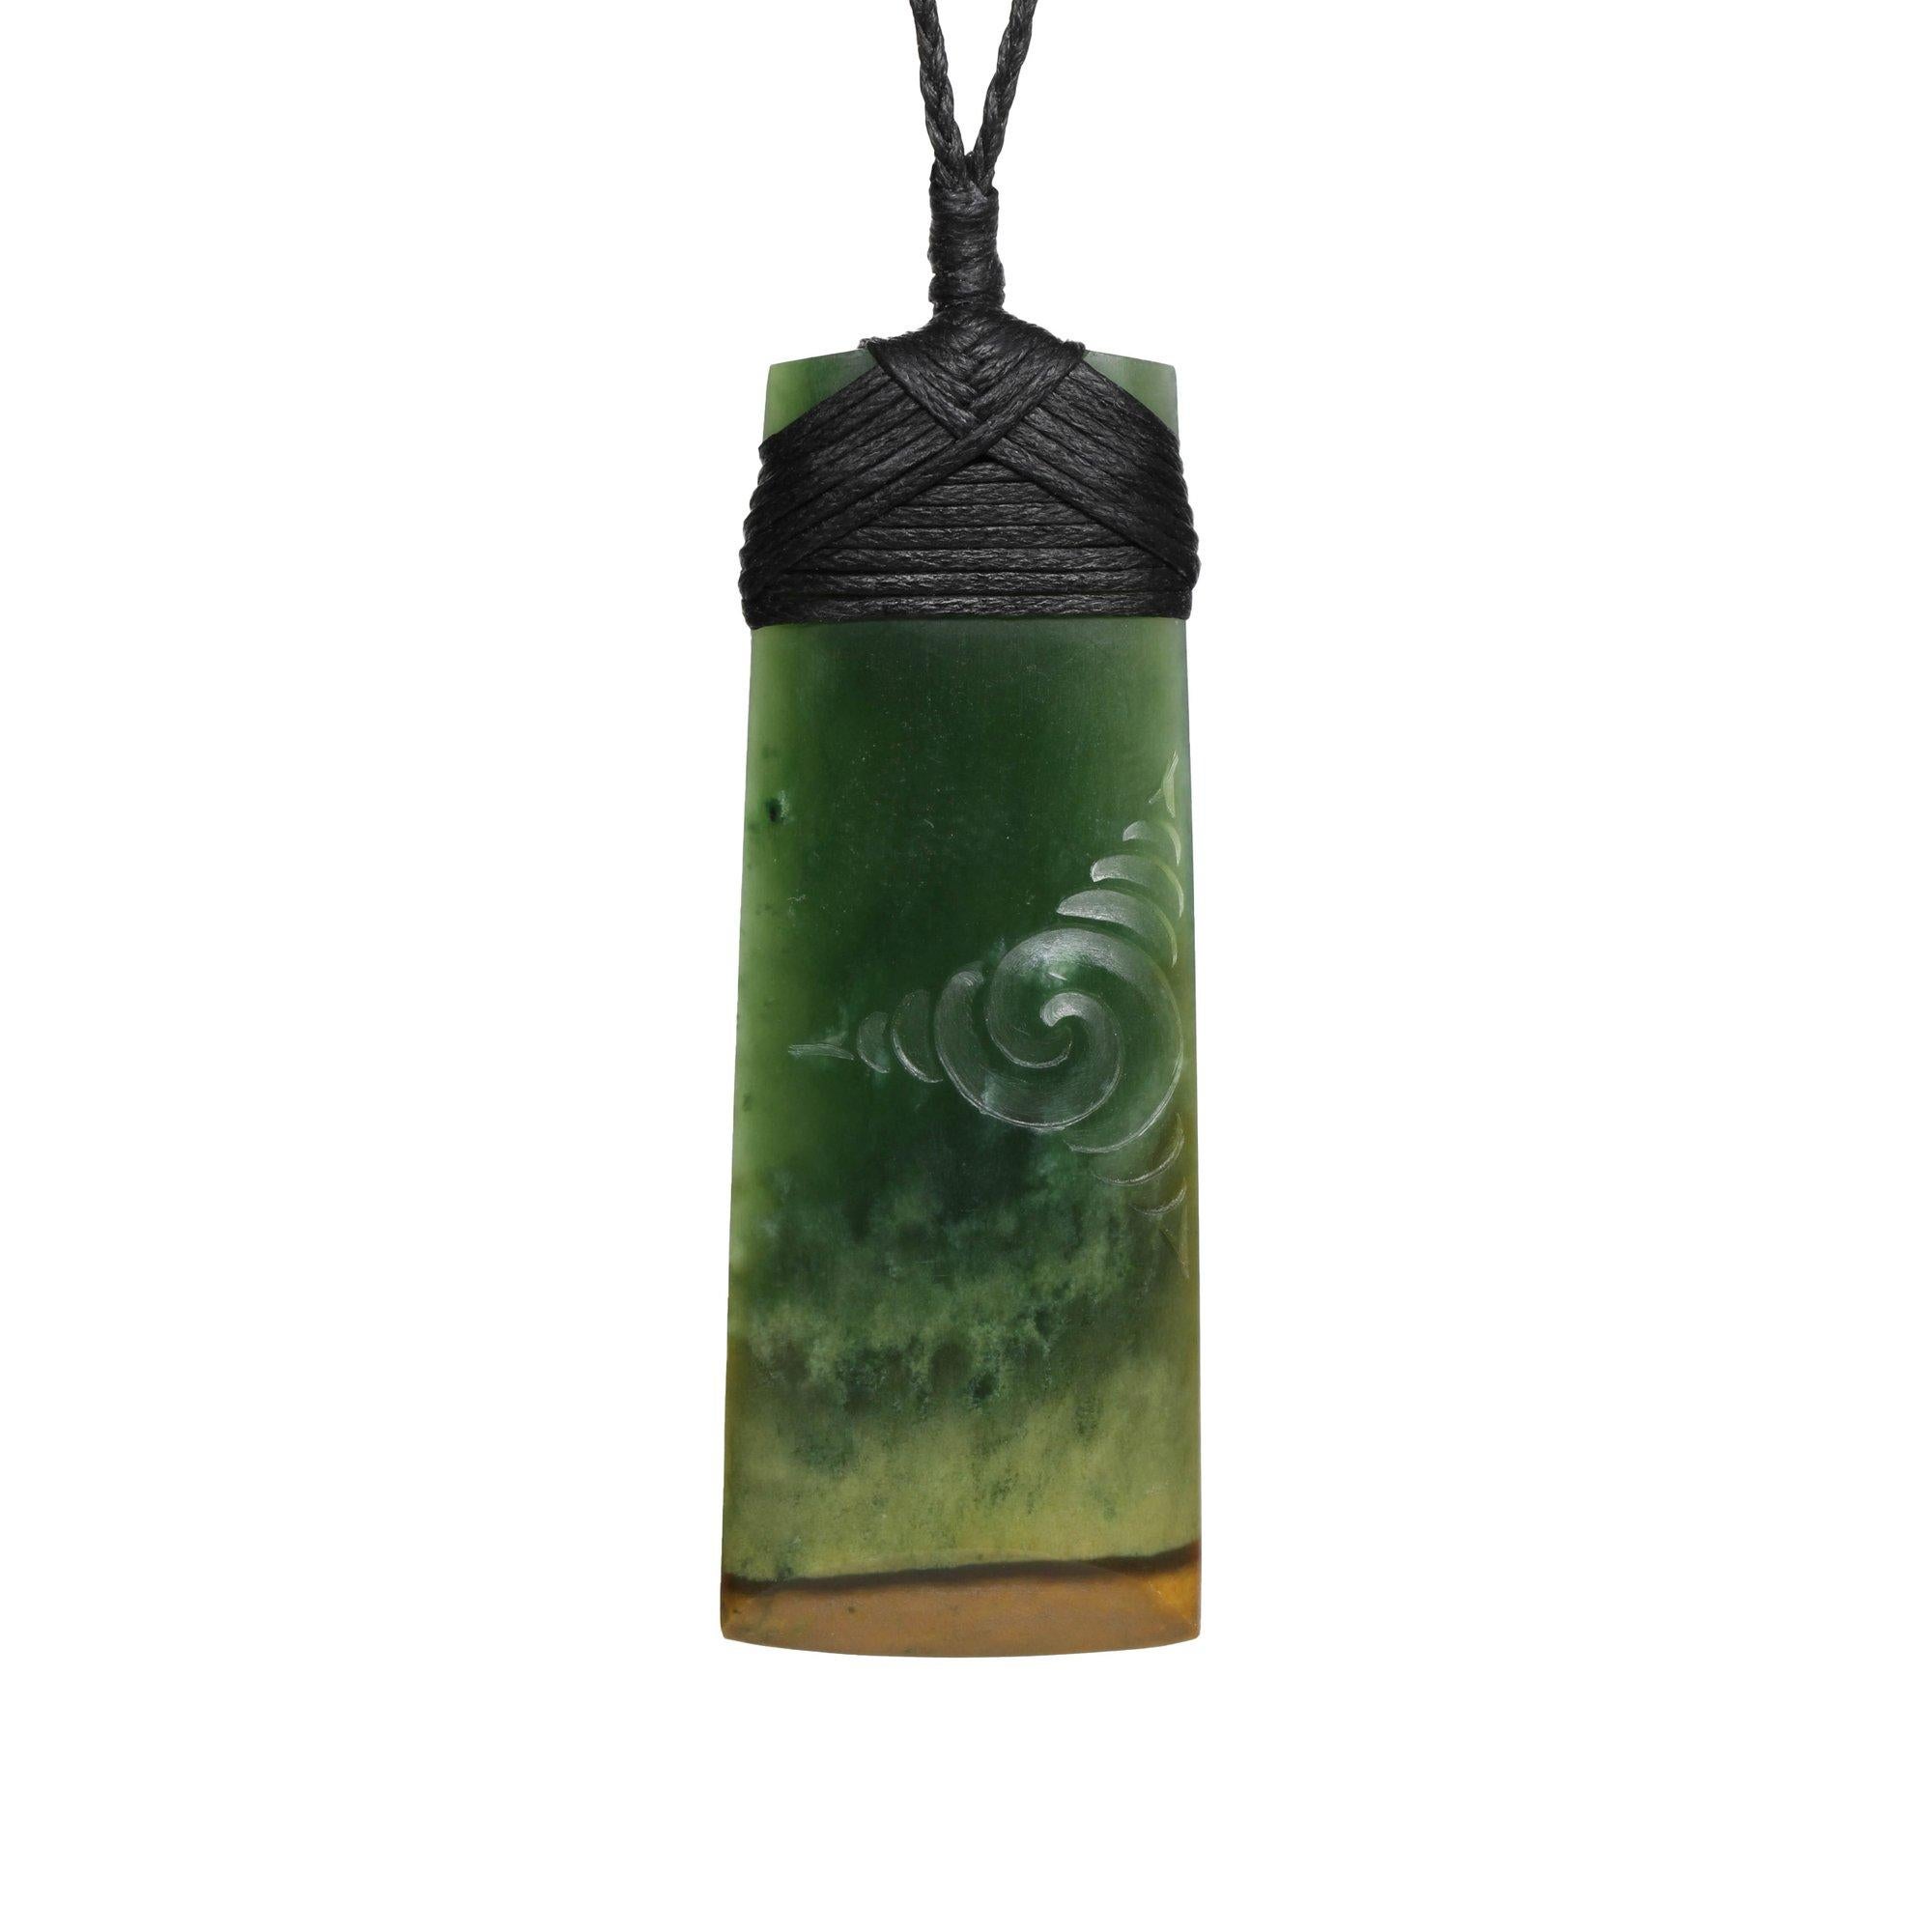 
New Zealand Pounamu Faceted Adze Necklace   . Adze means something used for shaping wood and is a old tadeona

Prehistoric Māori adzes from New Zealand (called toki in Māori) were used for  carving wood , typically made from pounamu sourced from